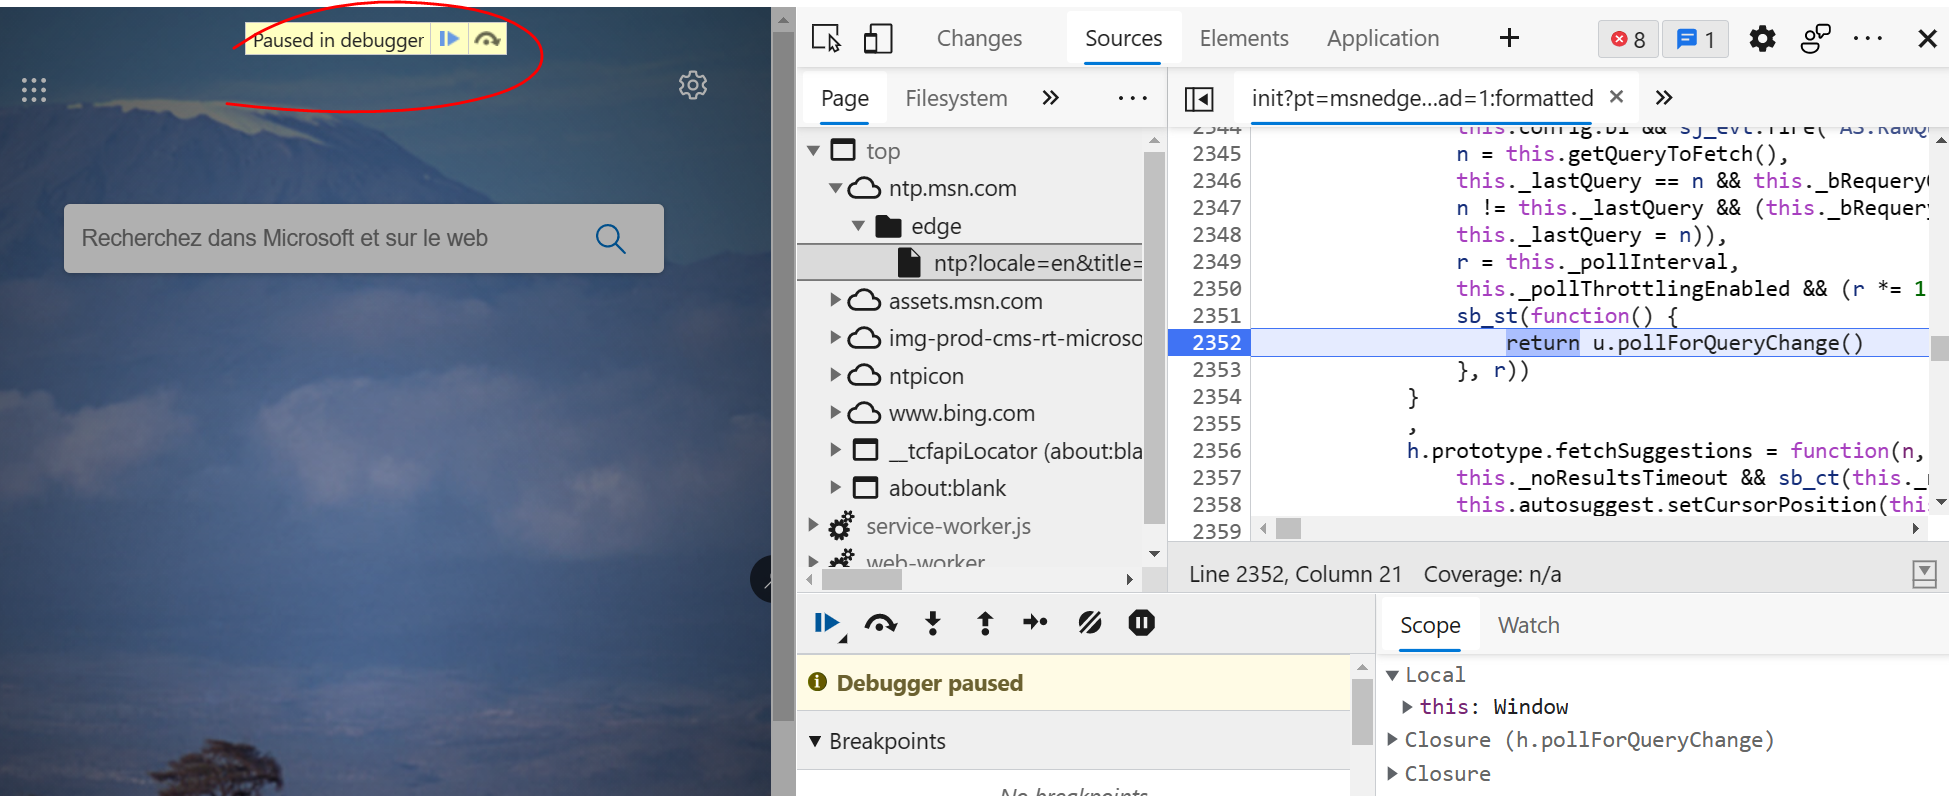 A page in edge with the DevTools Sources paused at a location, and the on-page overlay preventing access to the page.